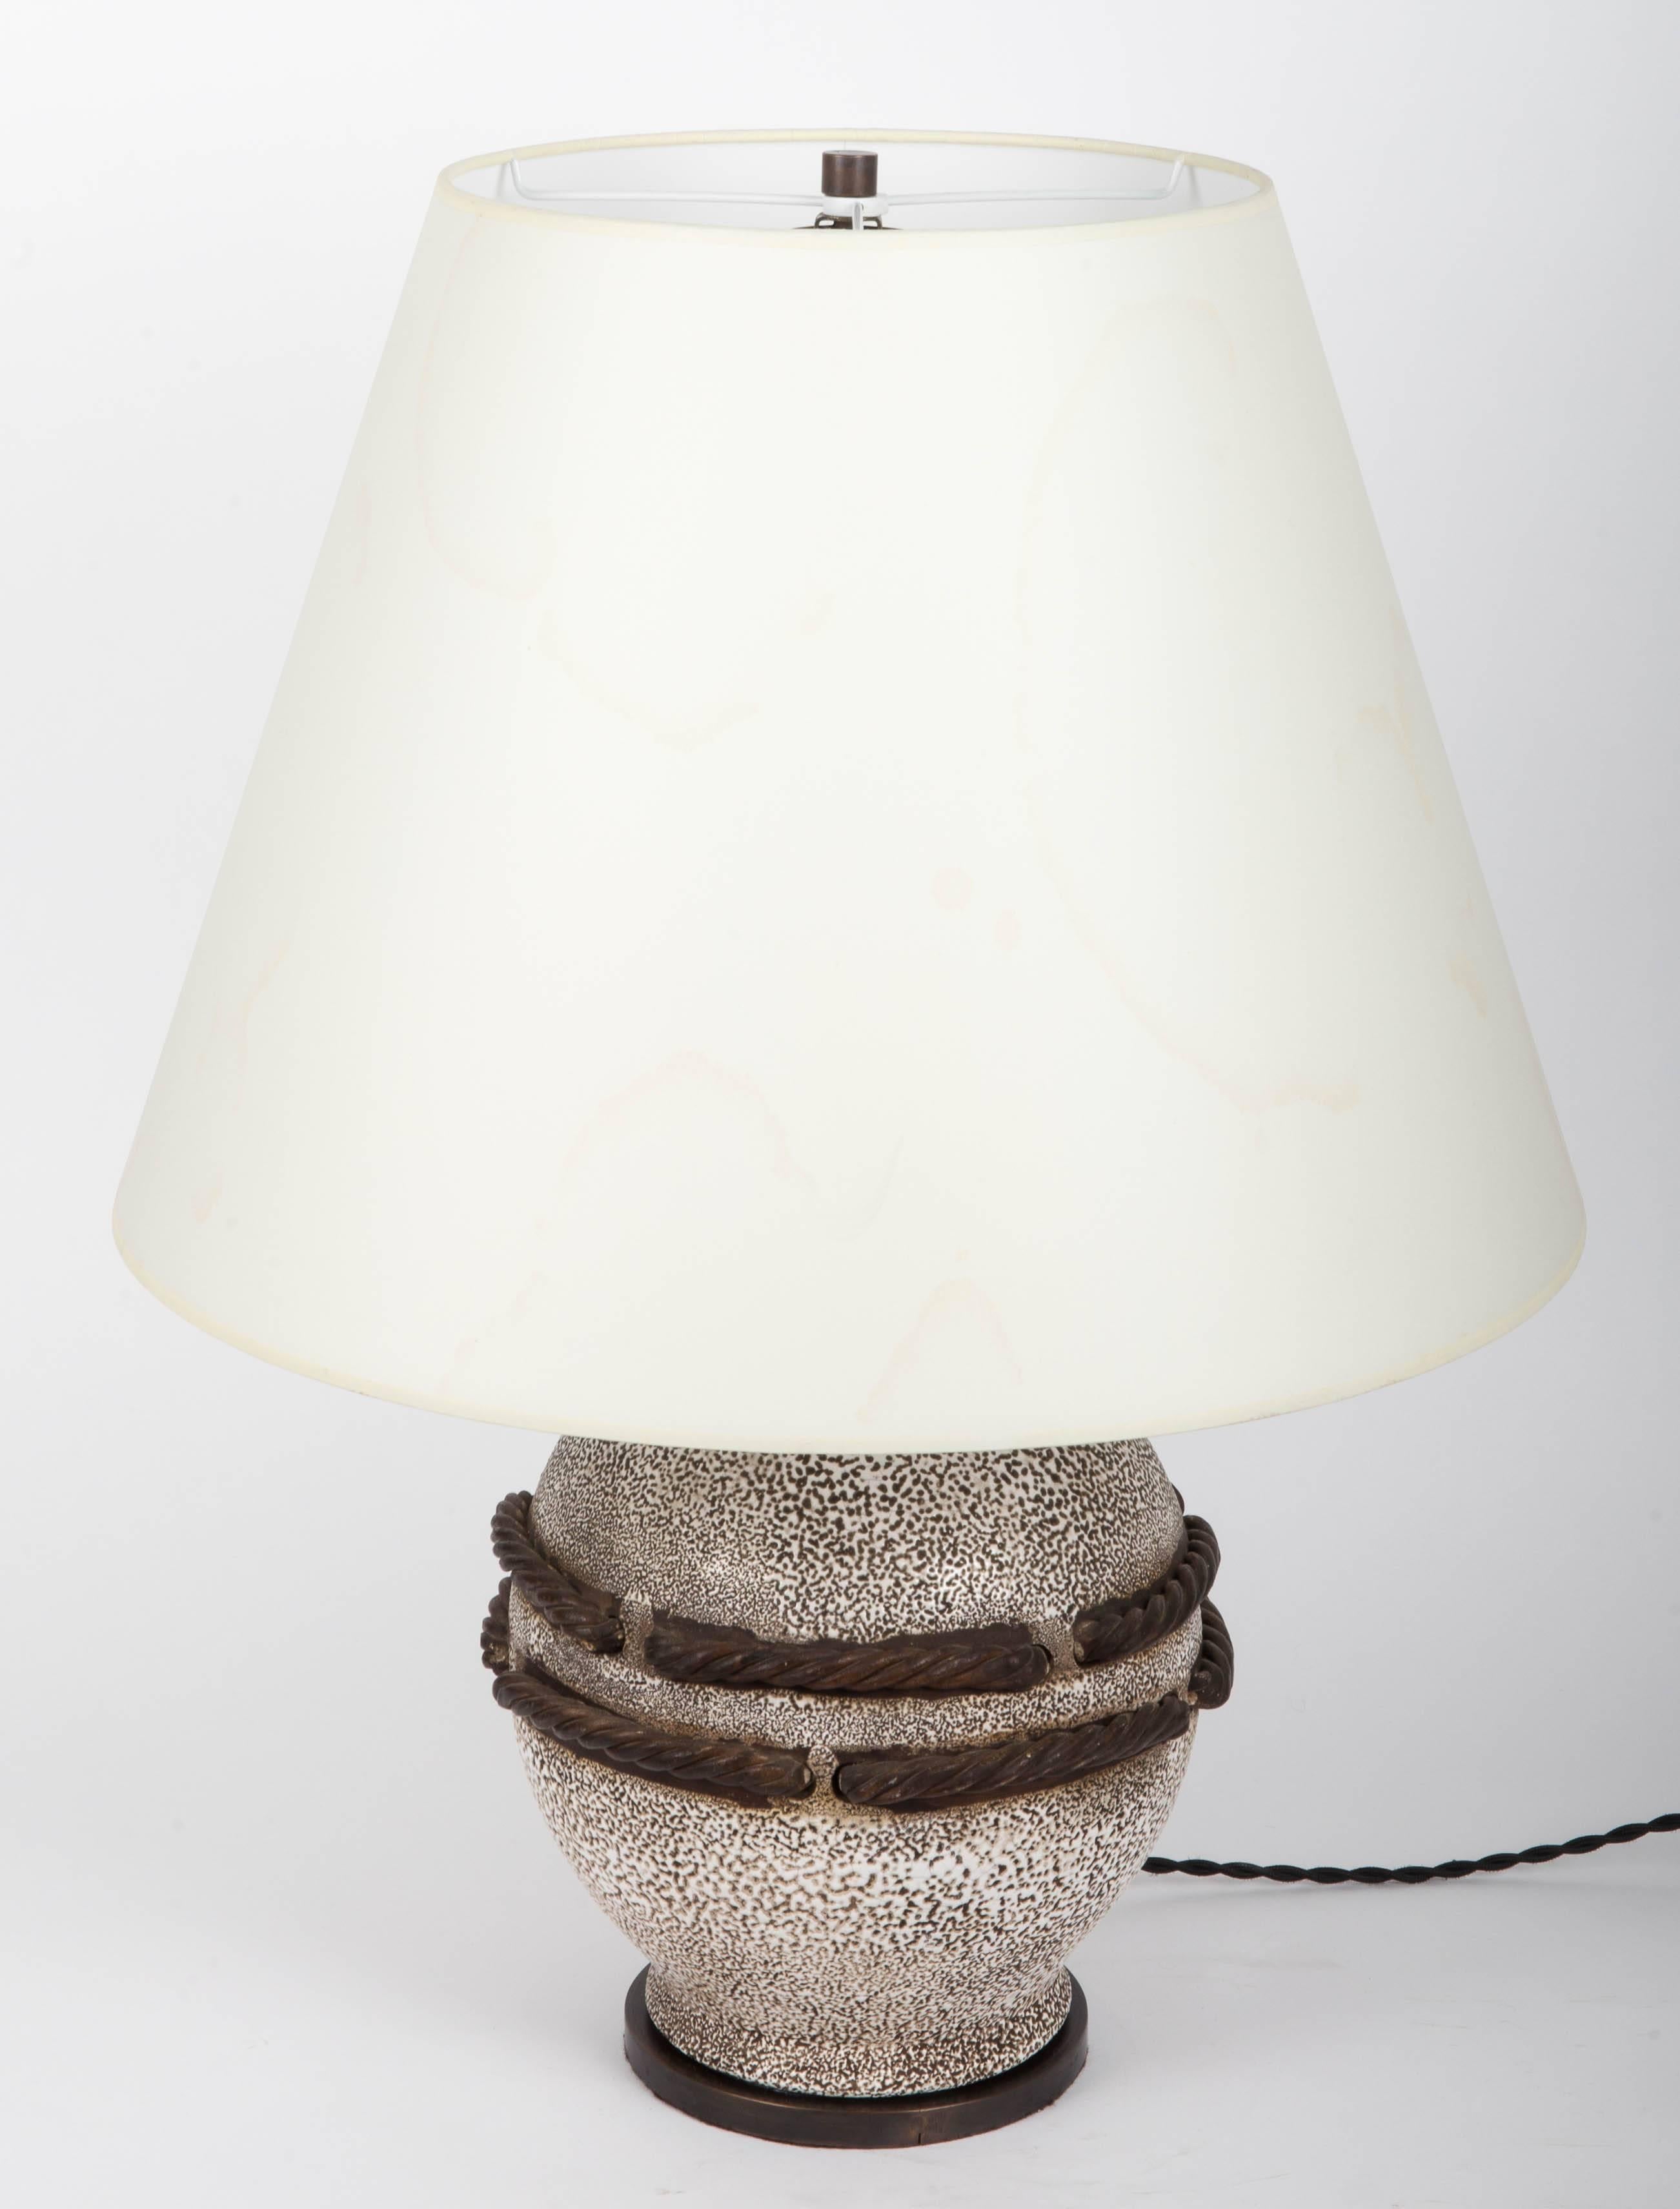 Ivory stone enameled lamp with brown rope detailing, nautical style.